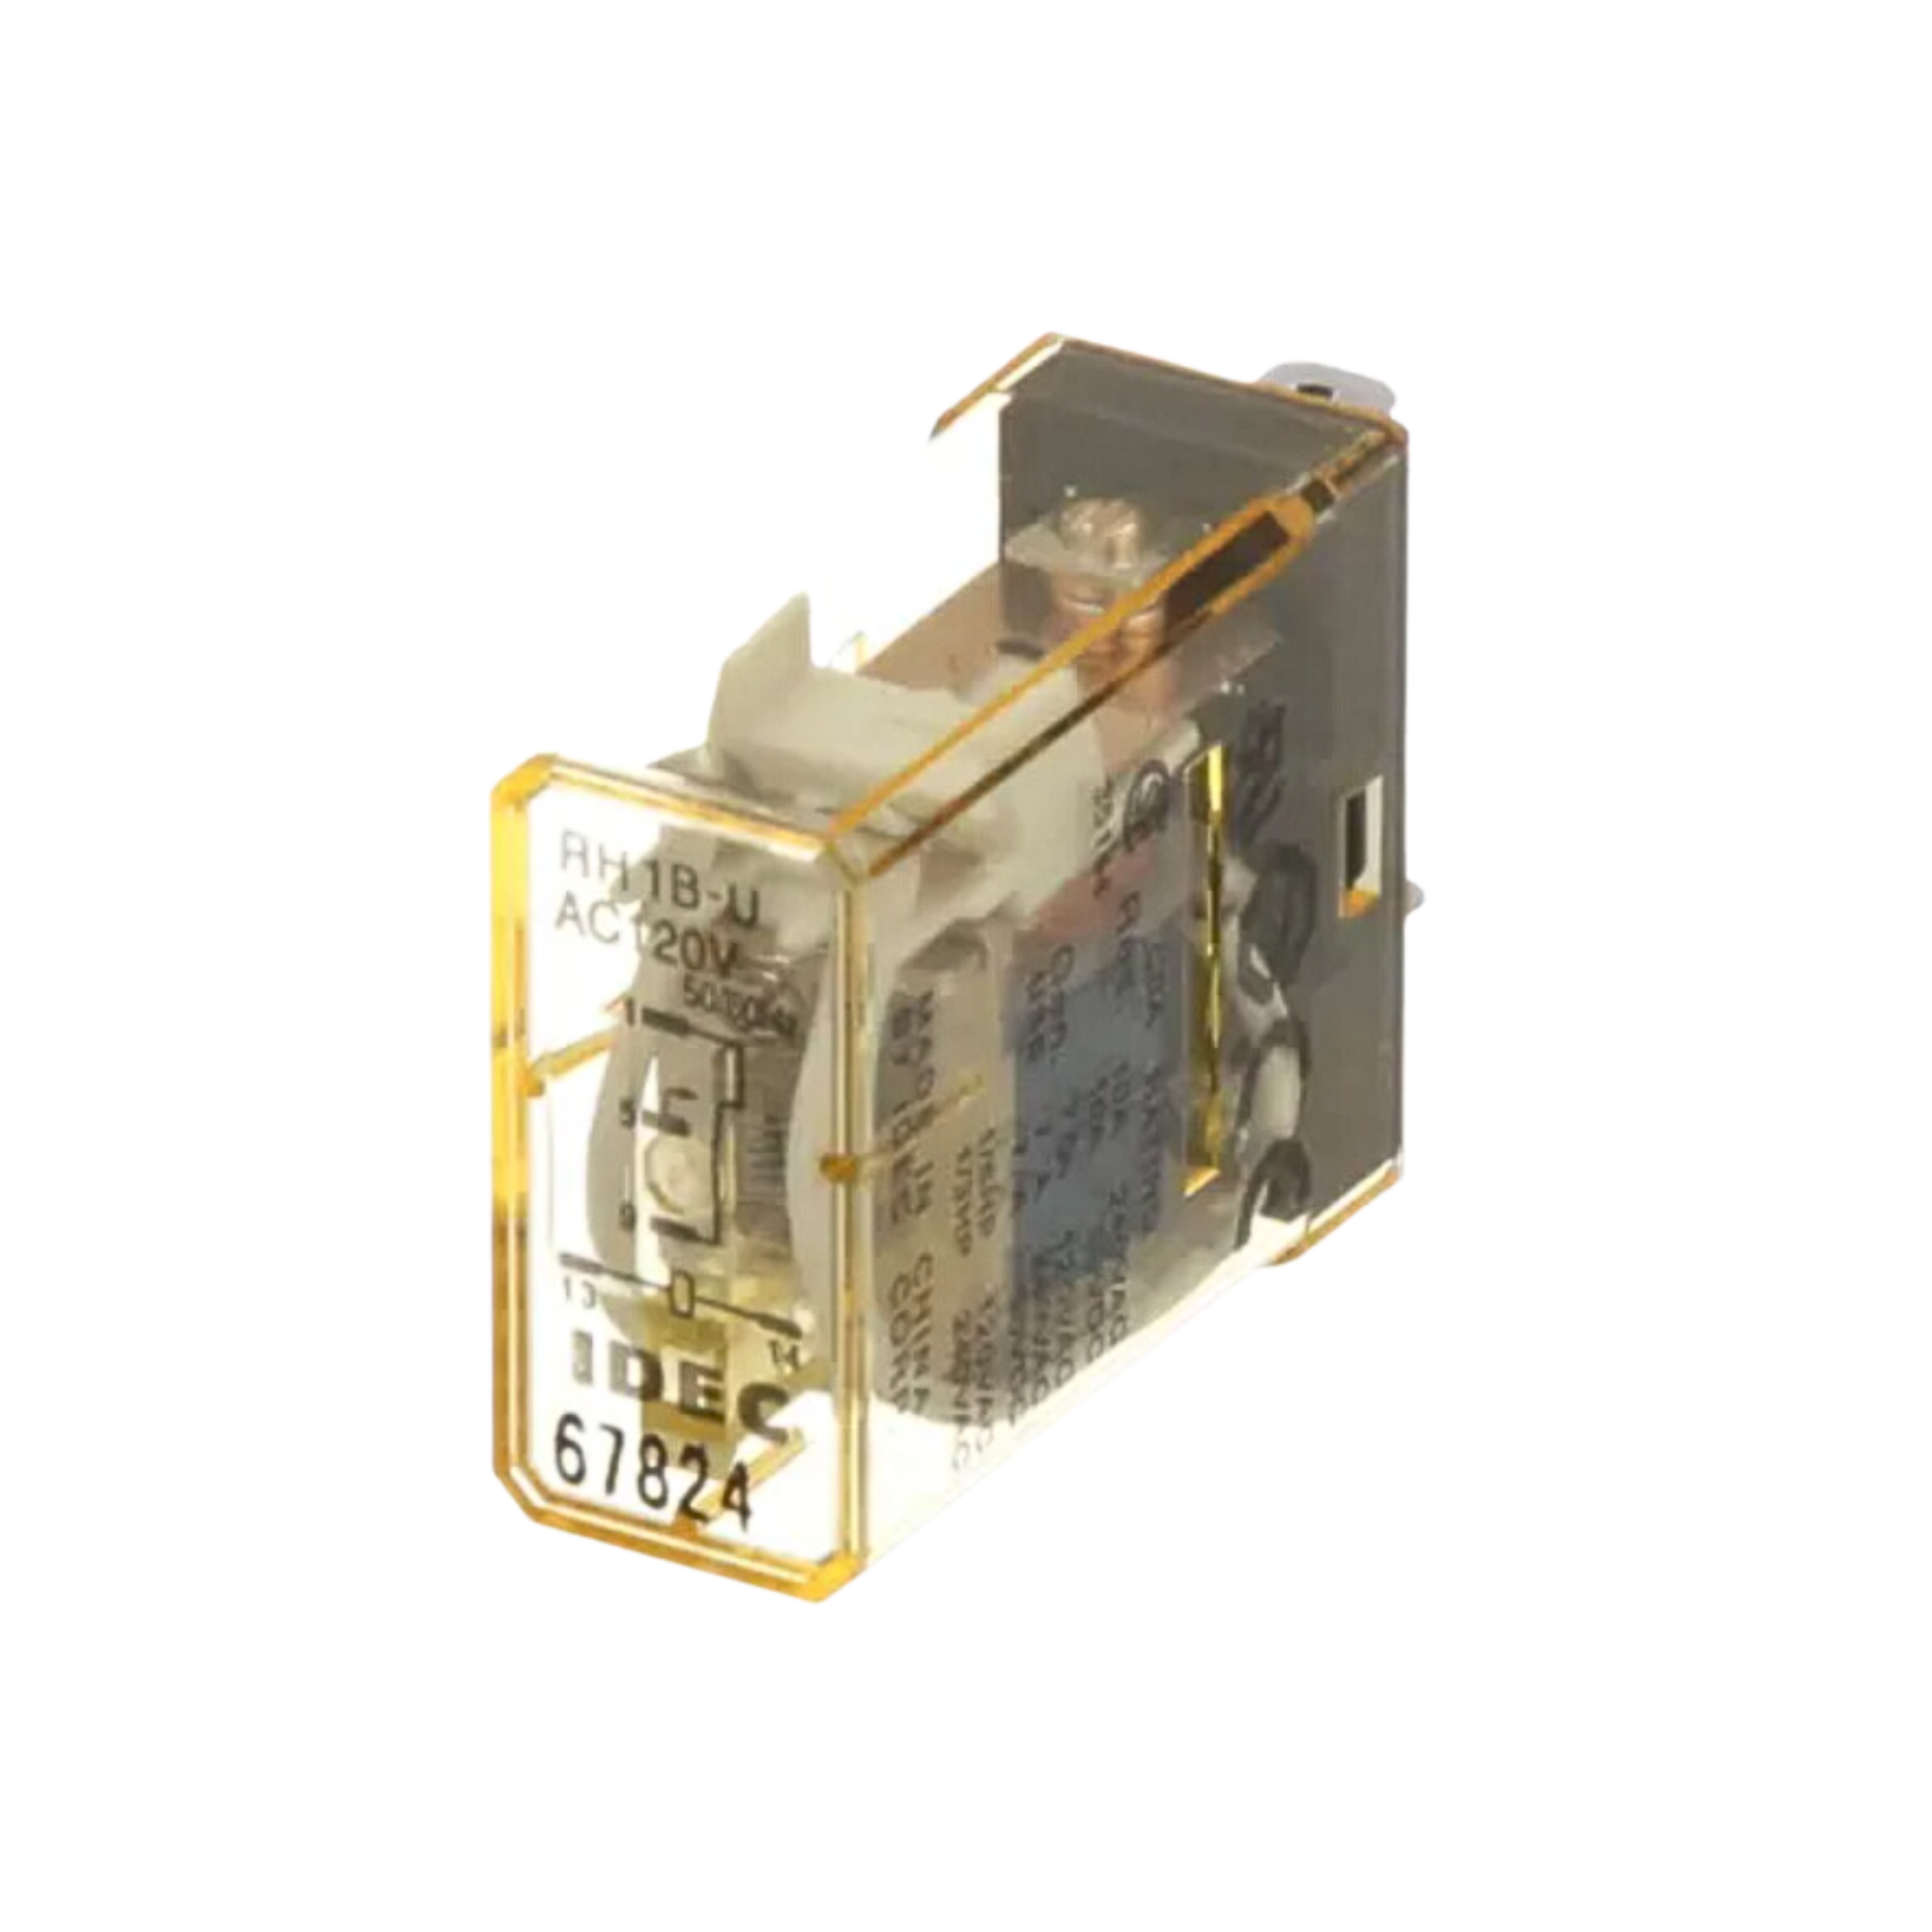 Plug-In Relay | RH1B-UAC120V used on Idec product line- front view